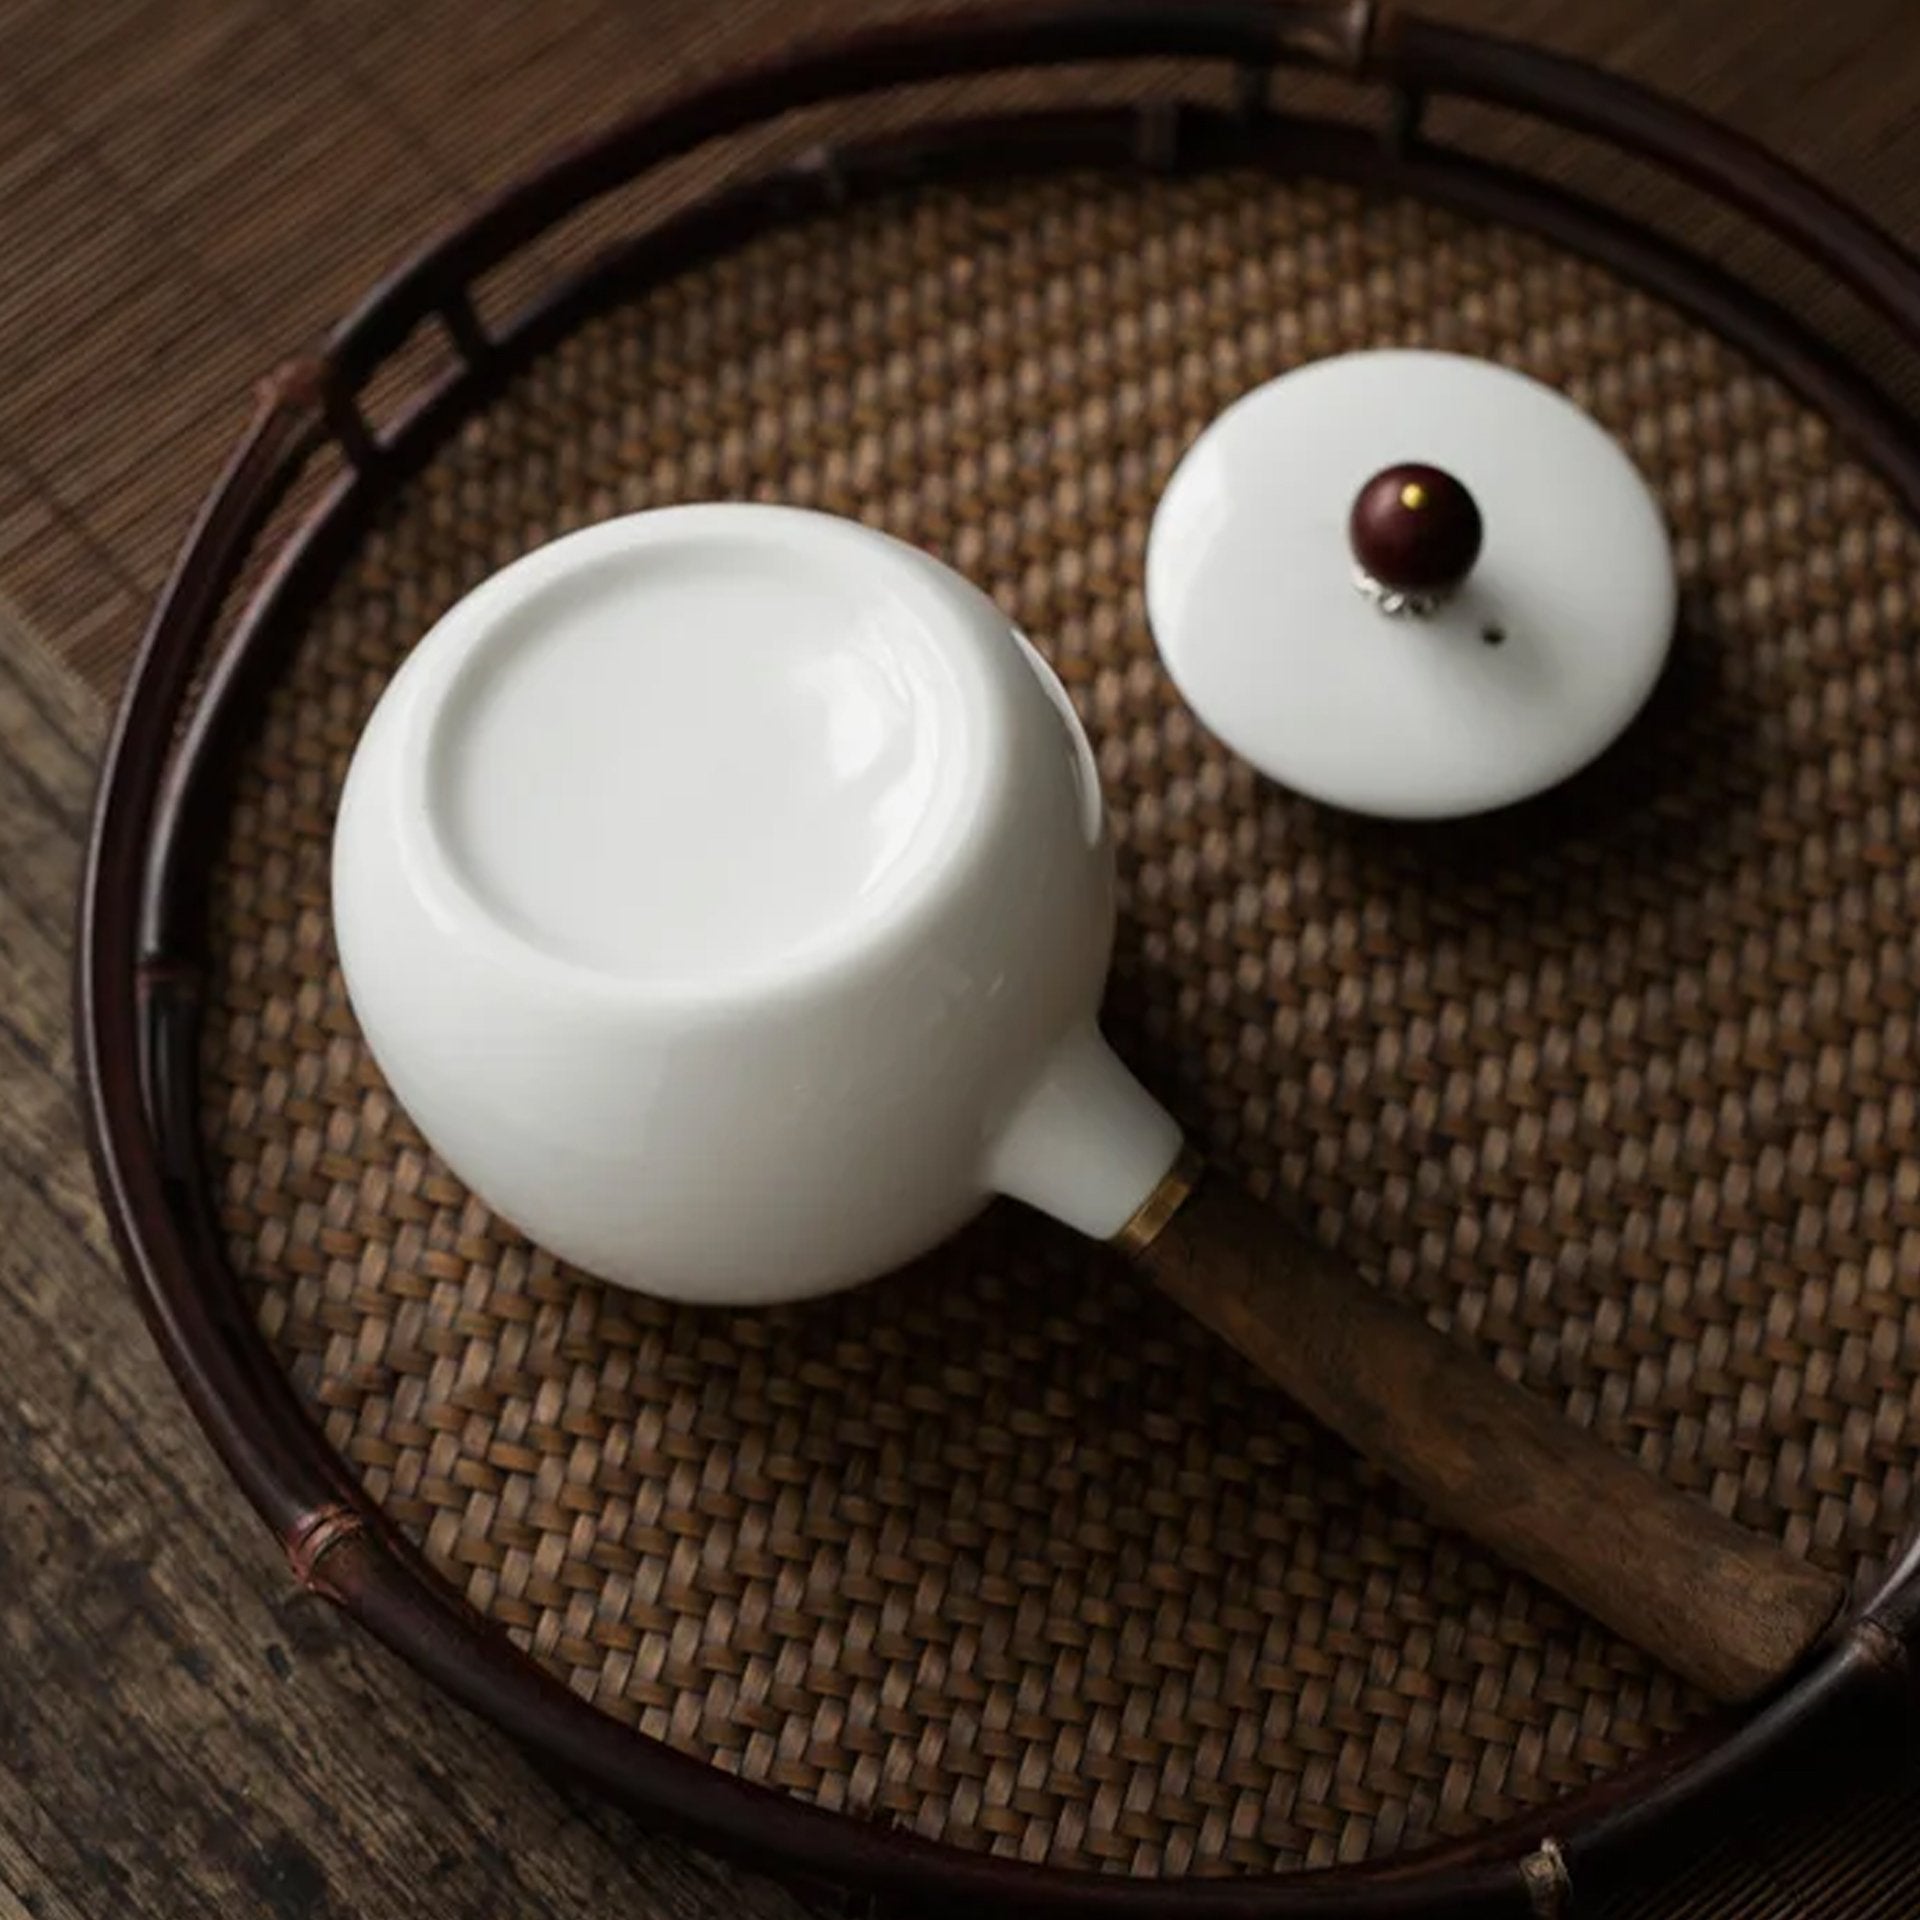 Overhead view of a white teapot with wooden handle on a woven tray with its lid off.